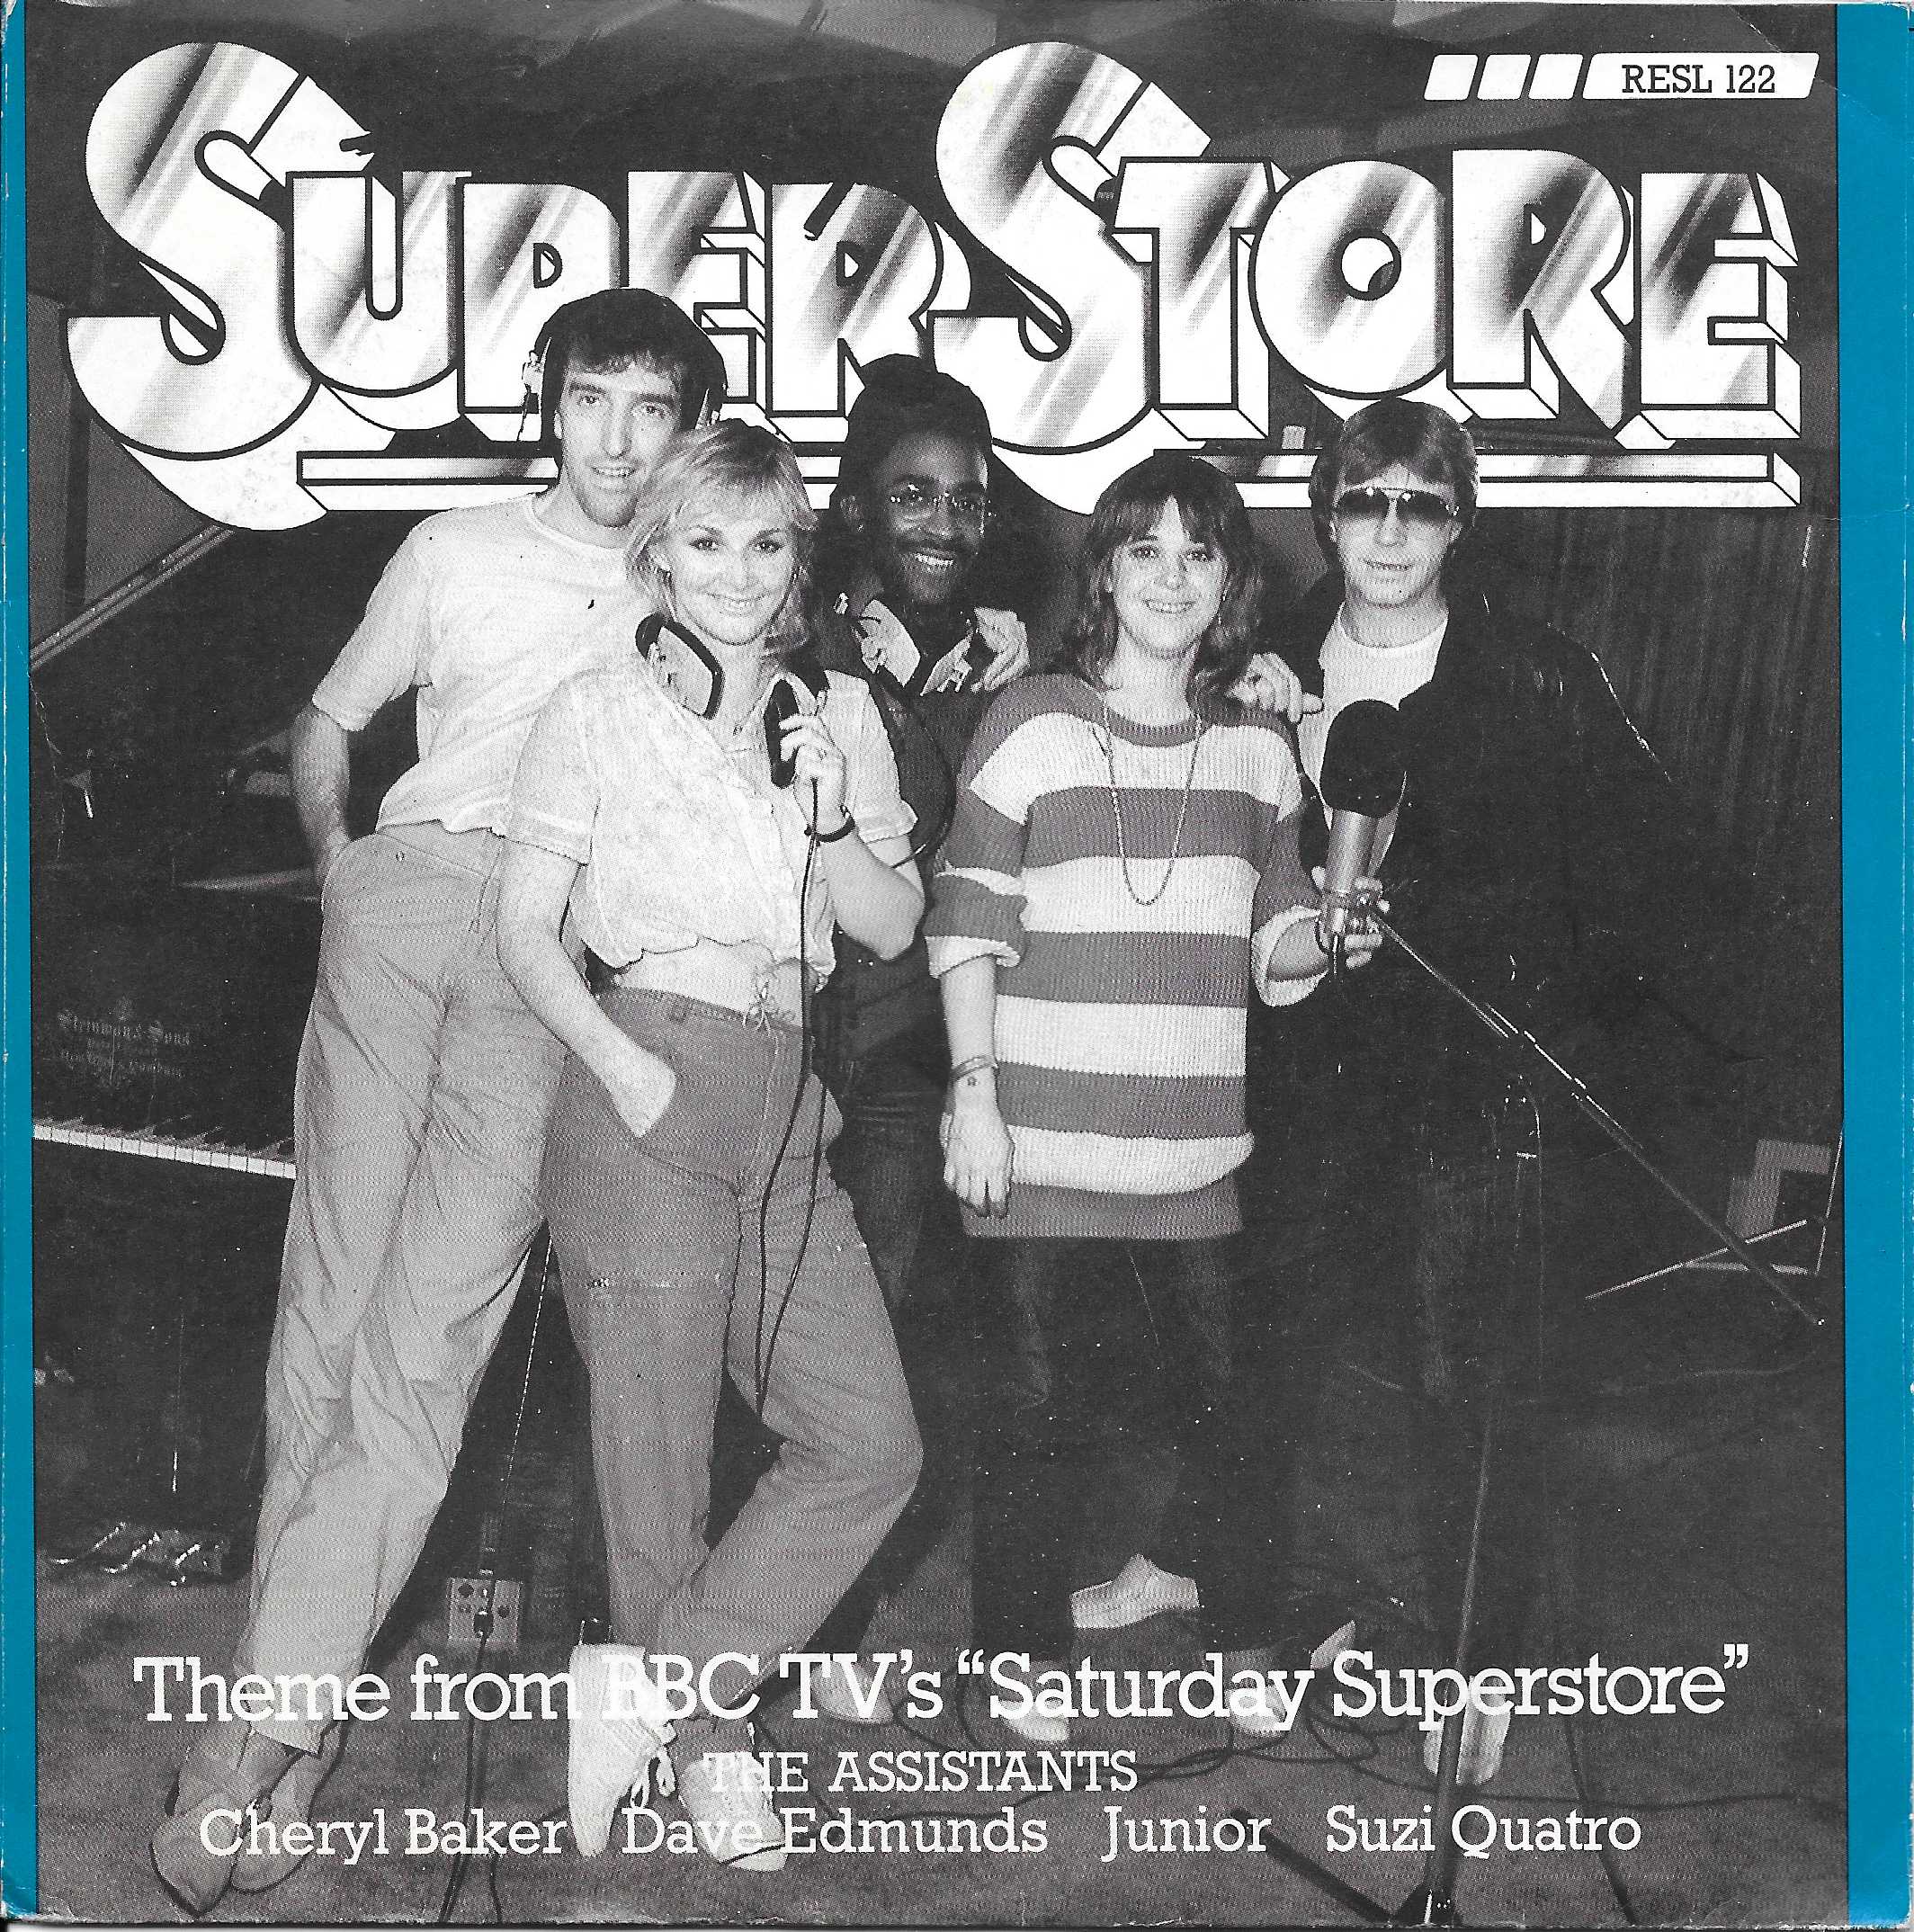 Picture of RESL 122-iD Down at the superstore (Saturday superstore) by artist B. A. Robertson from the BBC records and Tapes library